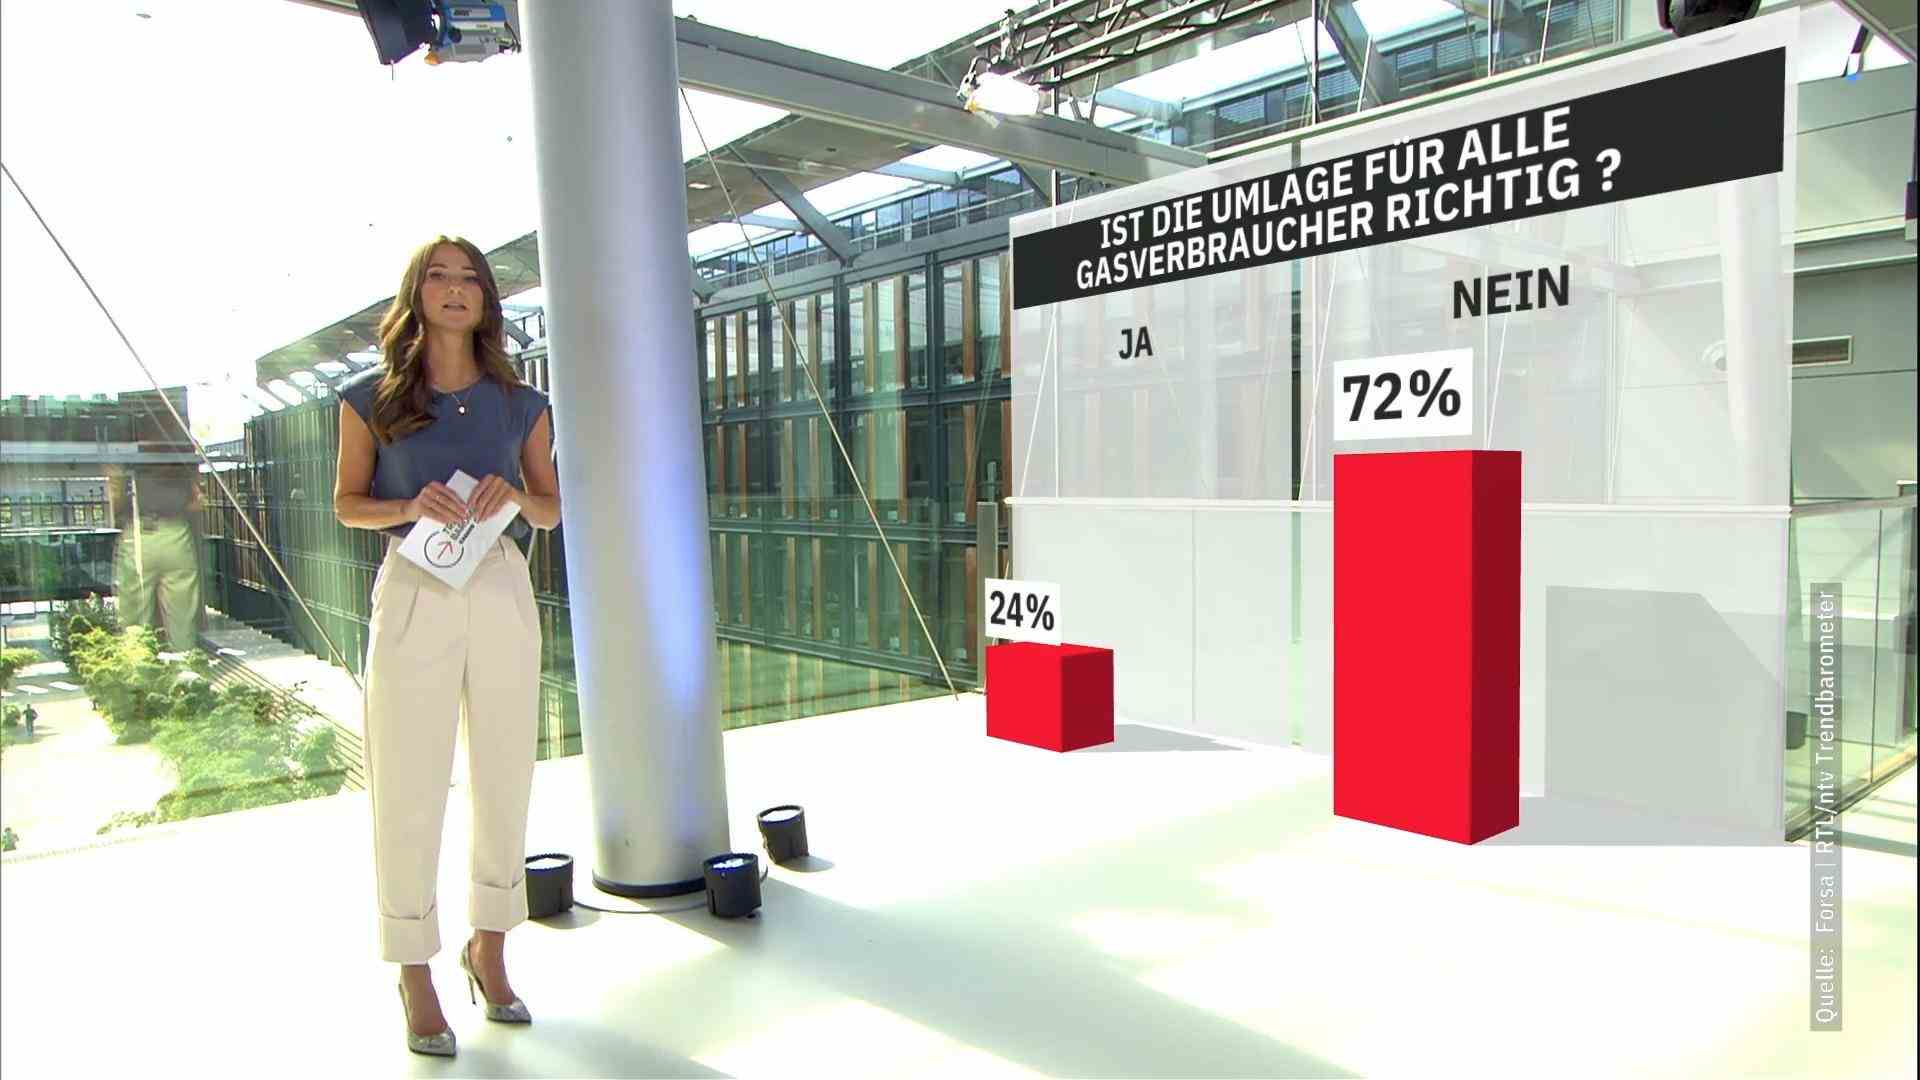 Majority of Germans find gas allocation wrong RTL/Ntv trend barometer